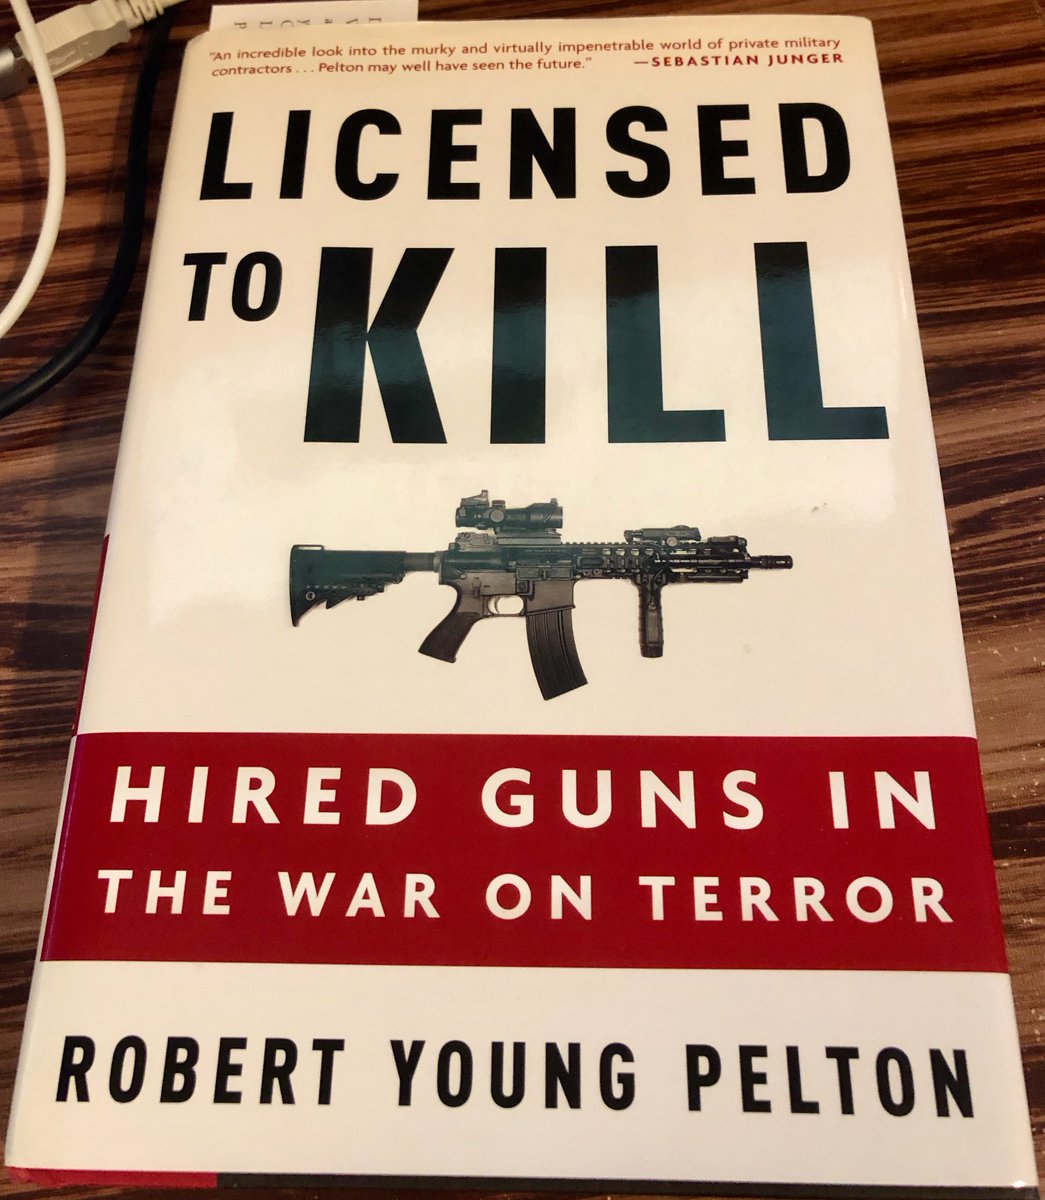 27. "...Yet, Erik's agreed to go on record with me." That's on page 1 of "Licensed to Kill: Hired Guns in the War on Terror" by Robert Young Pelton  @ryp__ (2006)